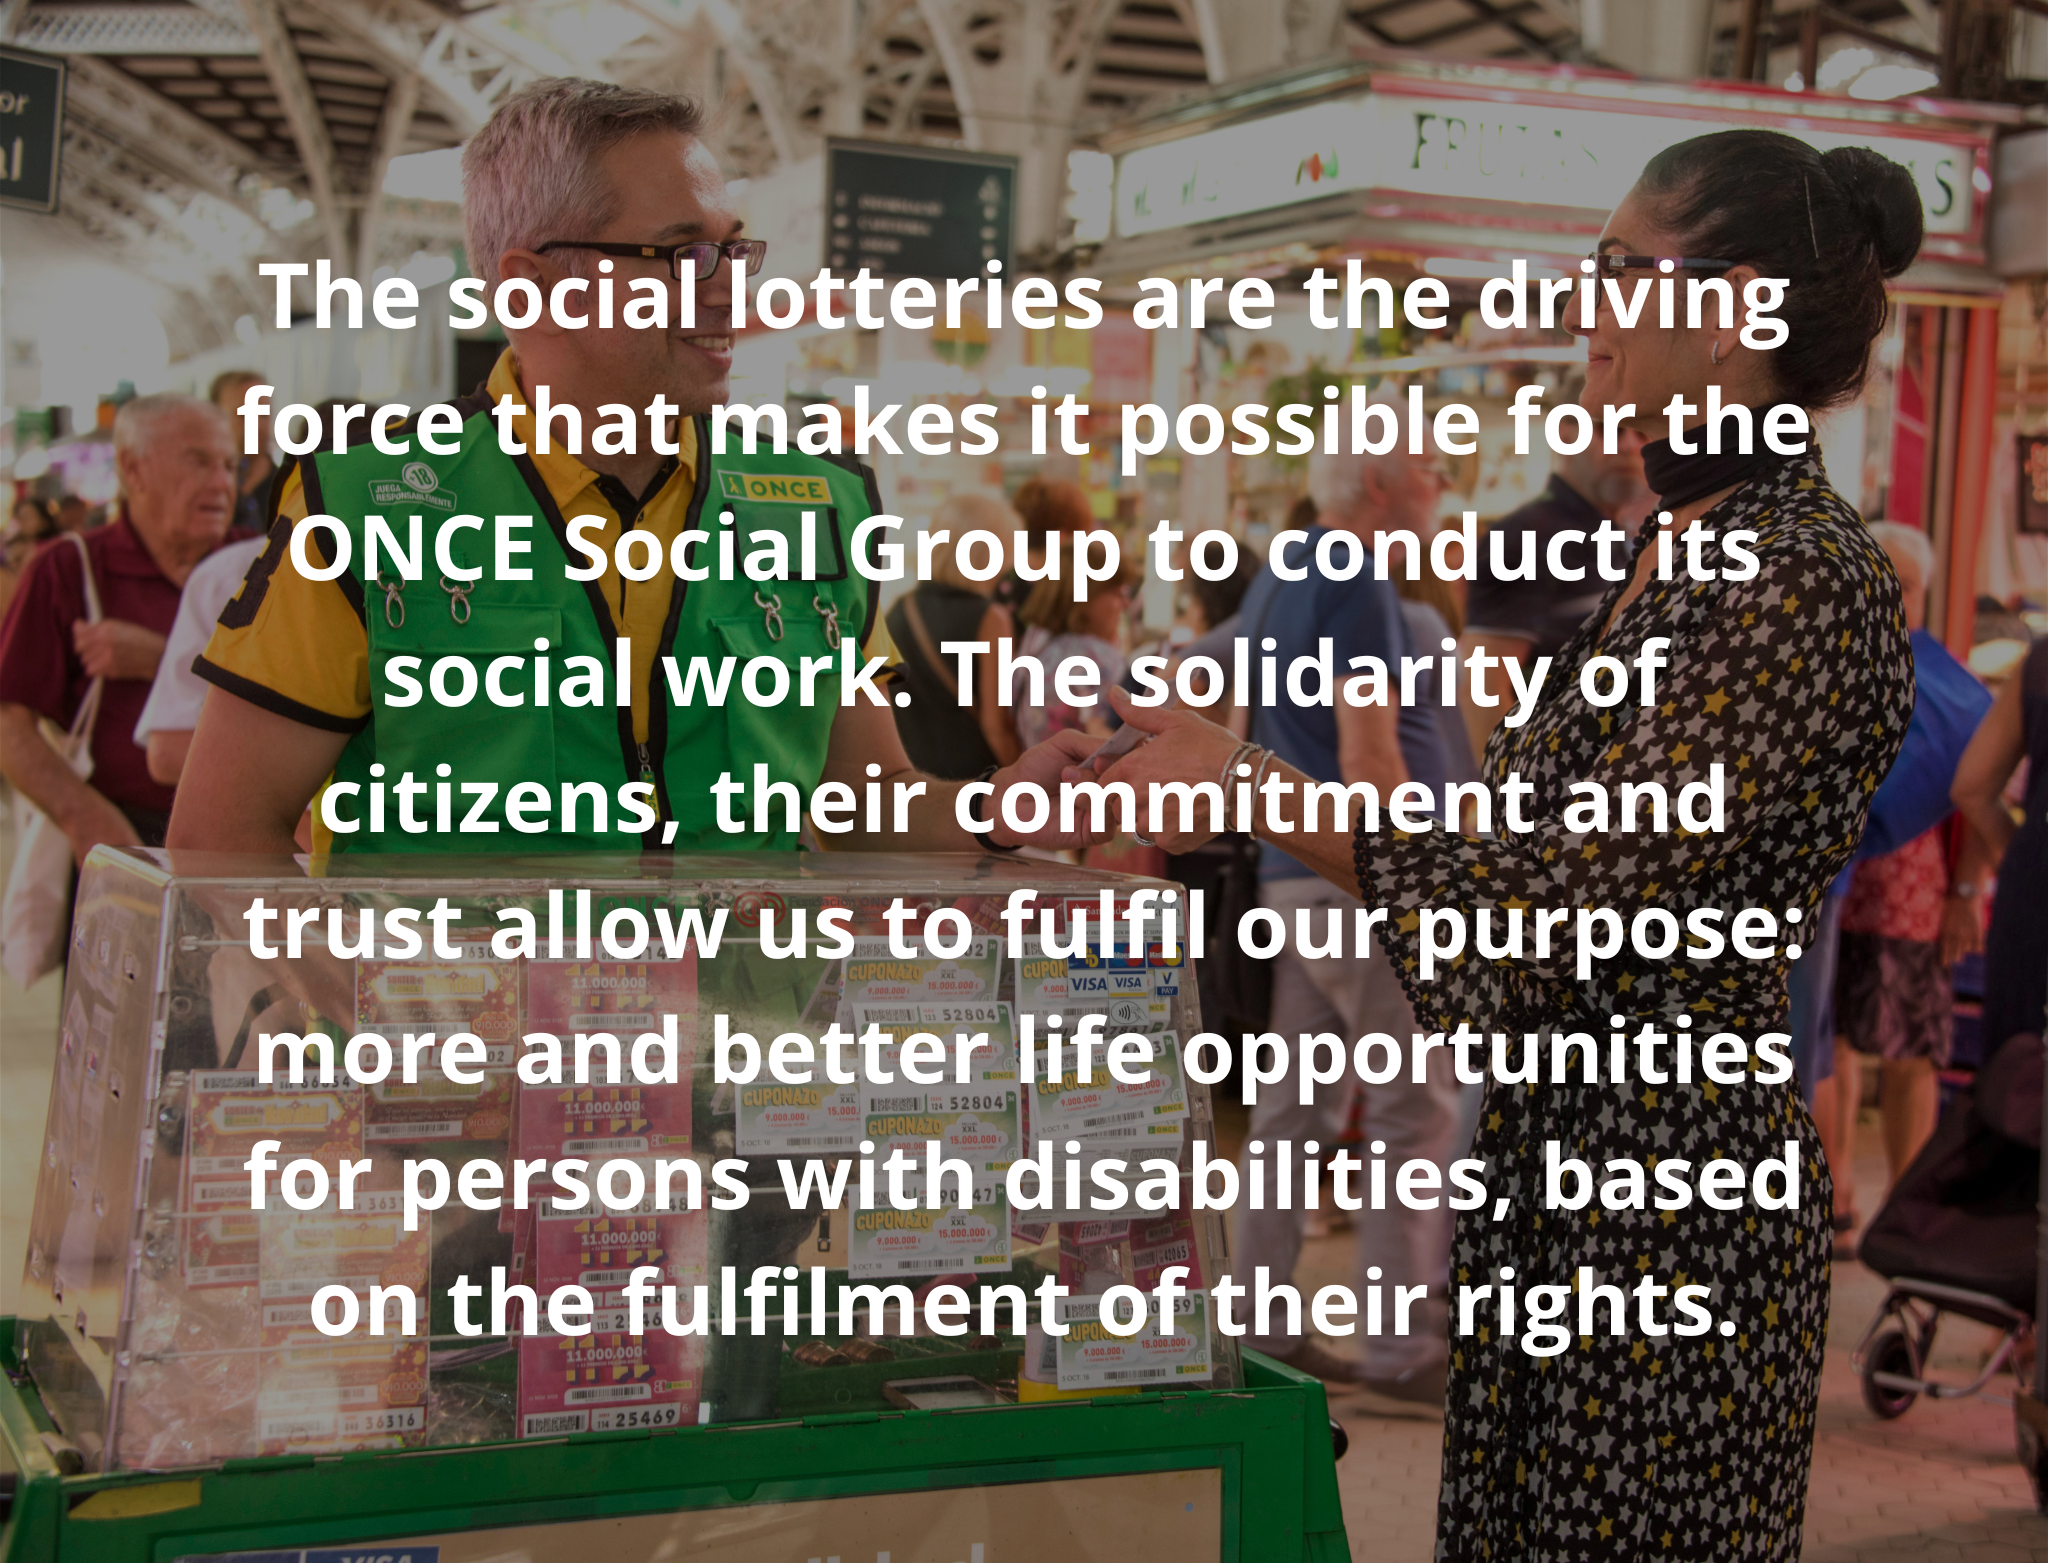 social lotteries are the driving force that makes it possible for the ONCE Social Group to conduct its social work. The solidarity of citizens, their commitment and trust allow us to fulfil our purpose: more and better life opportunities for persons with disabilities, based on the fulfilment of their rights.